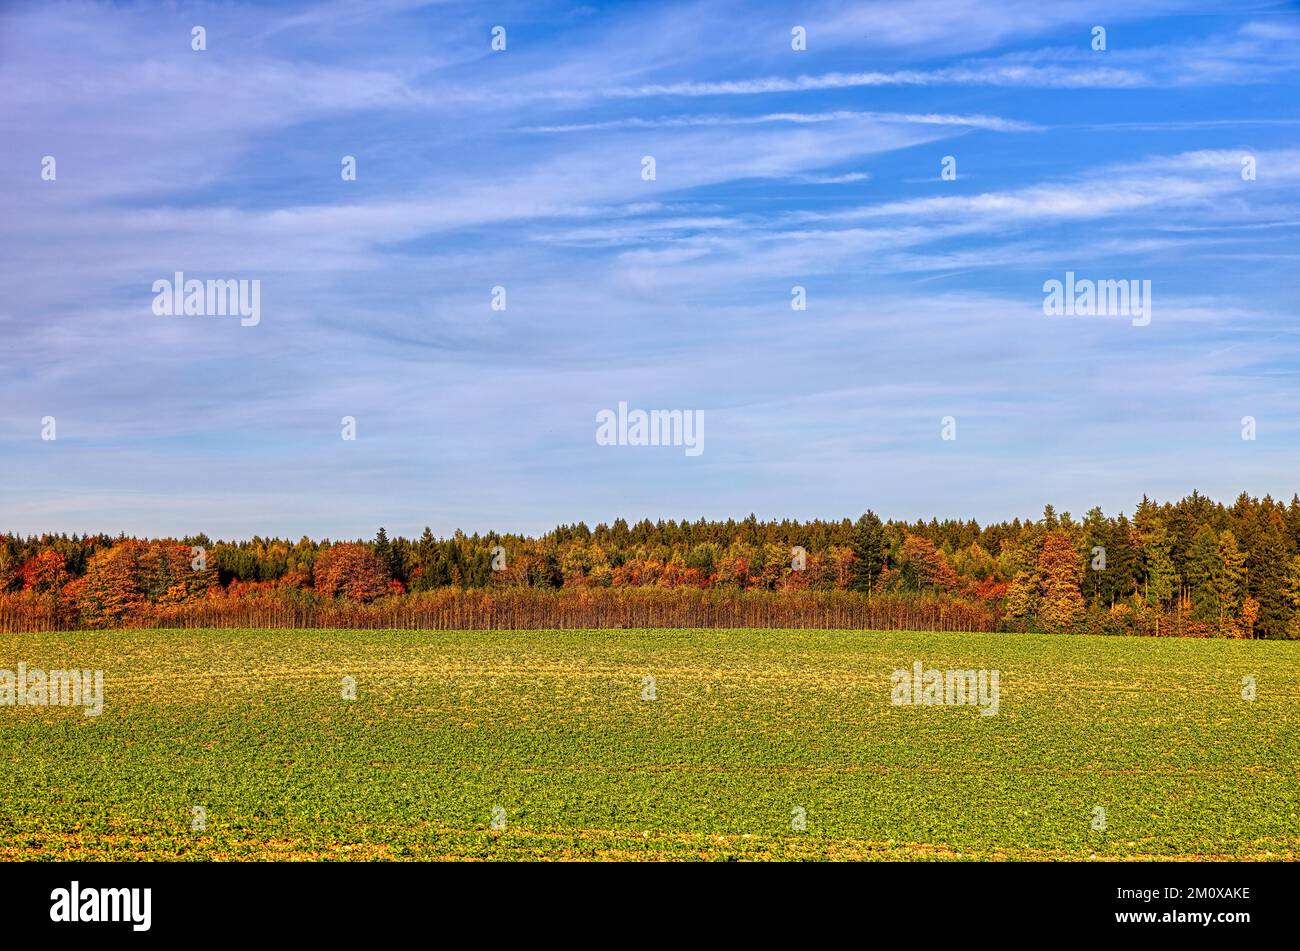 Forest, forest edge in autumn, spruces, beeches, trembling poplars, in the foreground fields, under a blue sky with white clouds, Upper Bavaria, Bavar Stock Photo